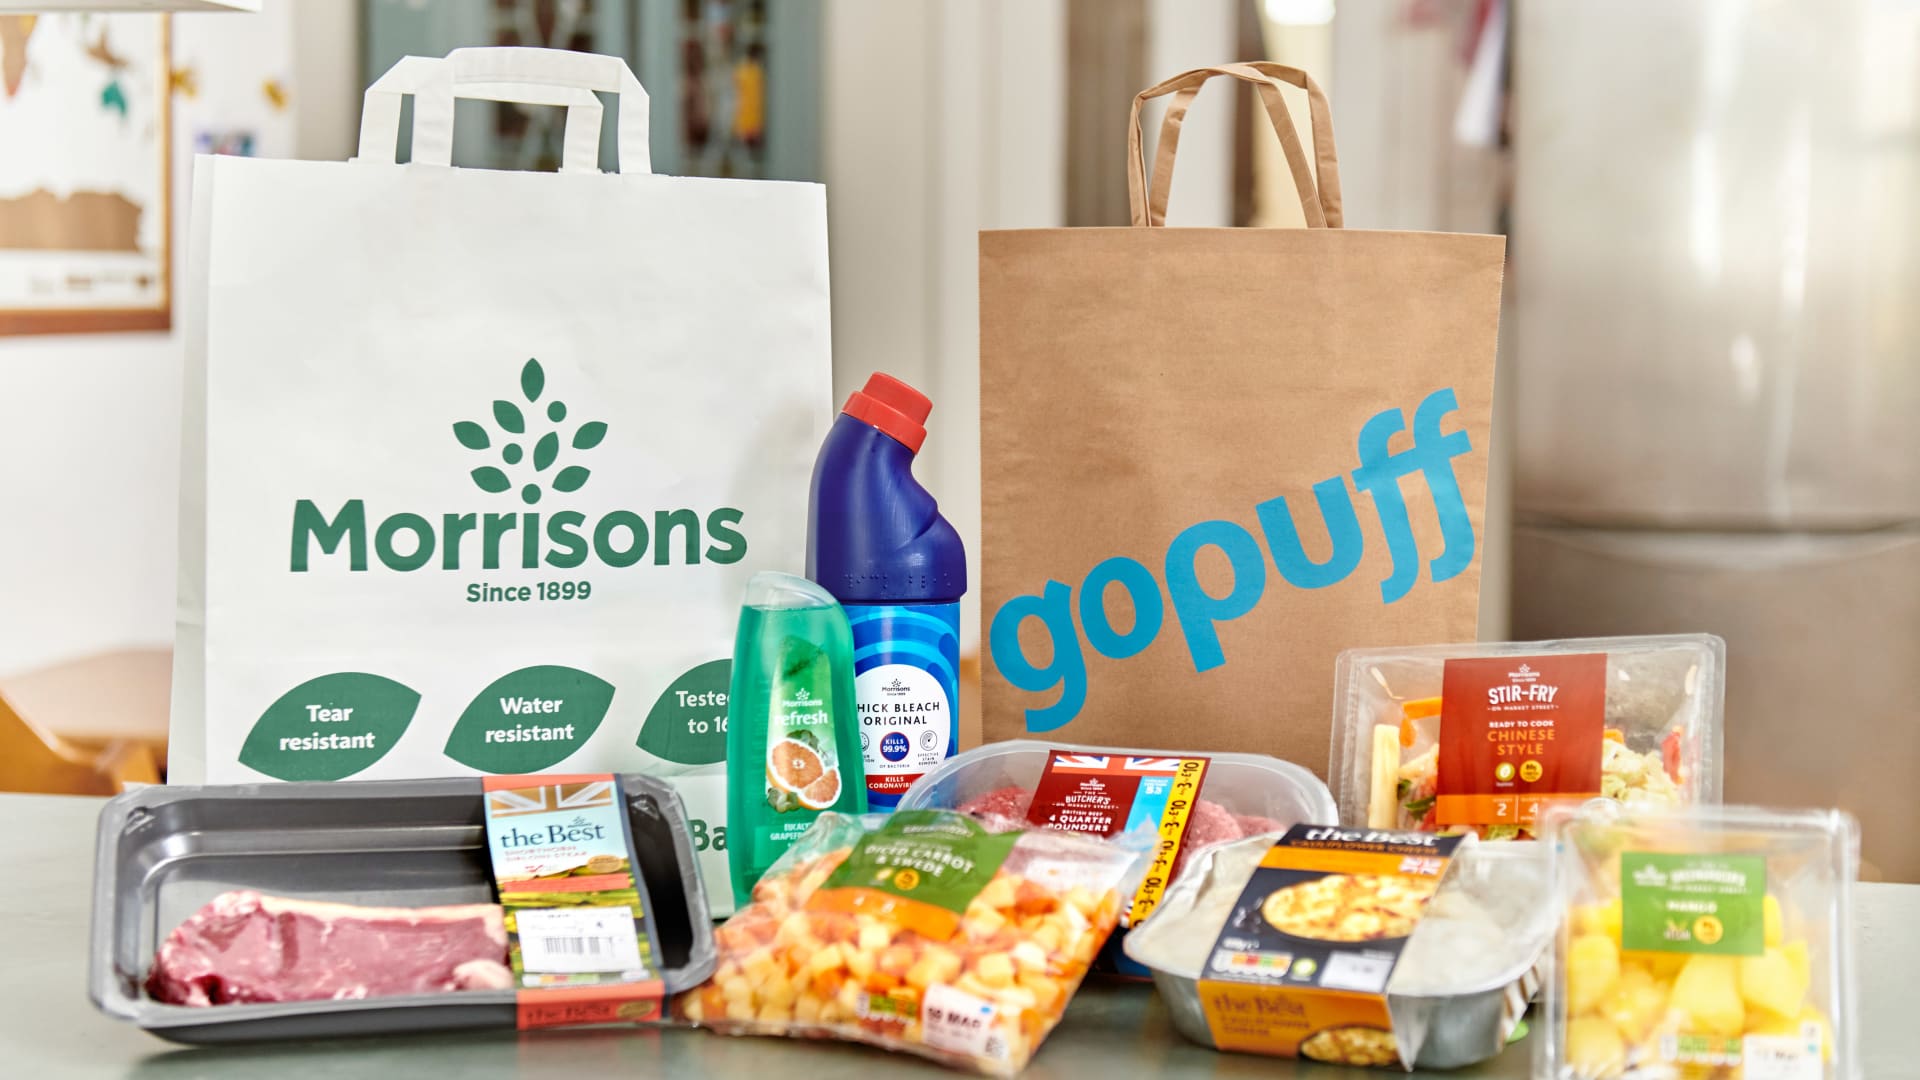 Gopuff partners with Morrisons in UK for speedy grocery delivery